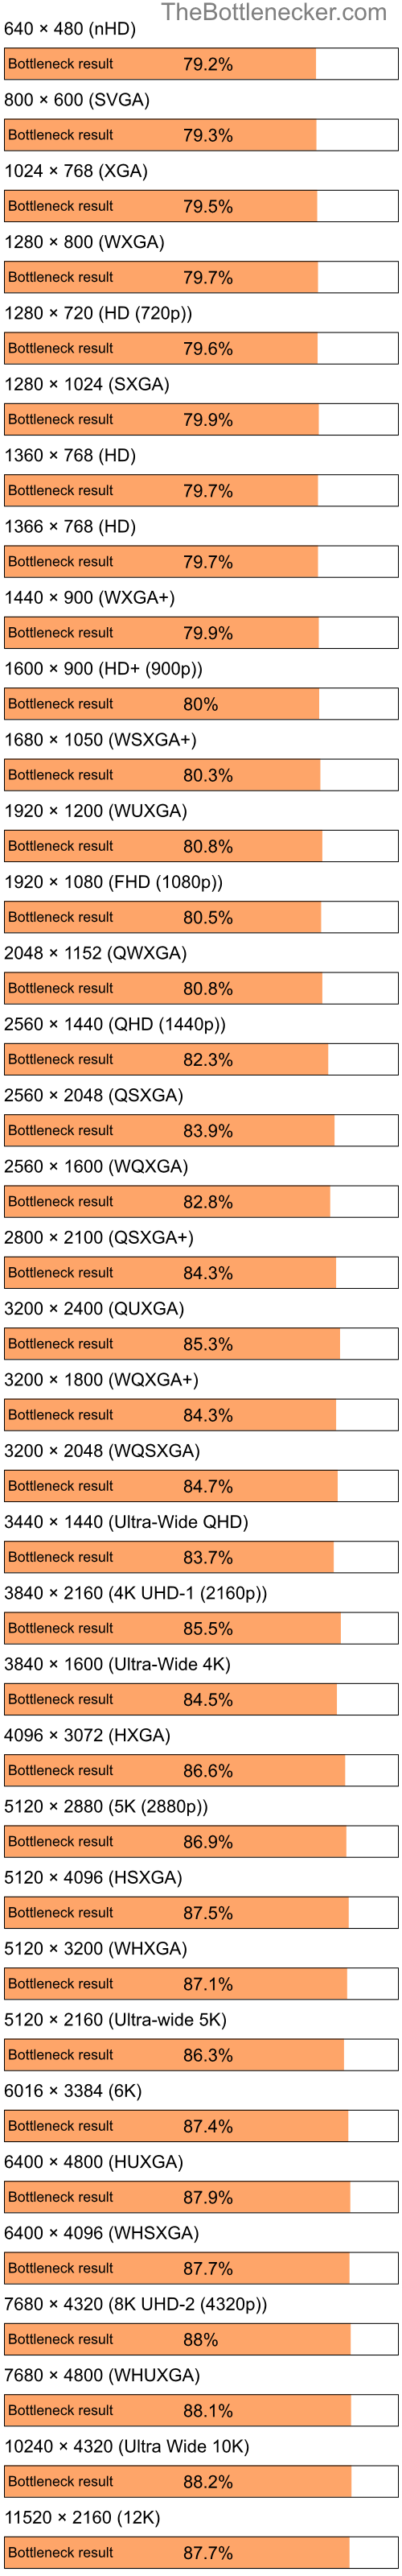 Bottleneck results by resolution for Intel Pentium 4 and NVIDIA GeForce 7100 in Graphic Card Intense Tasks